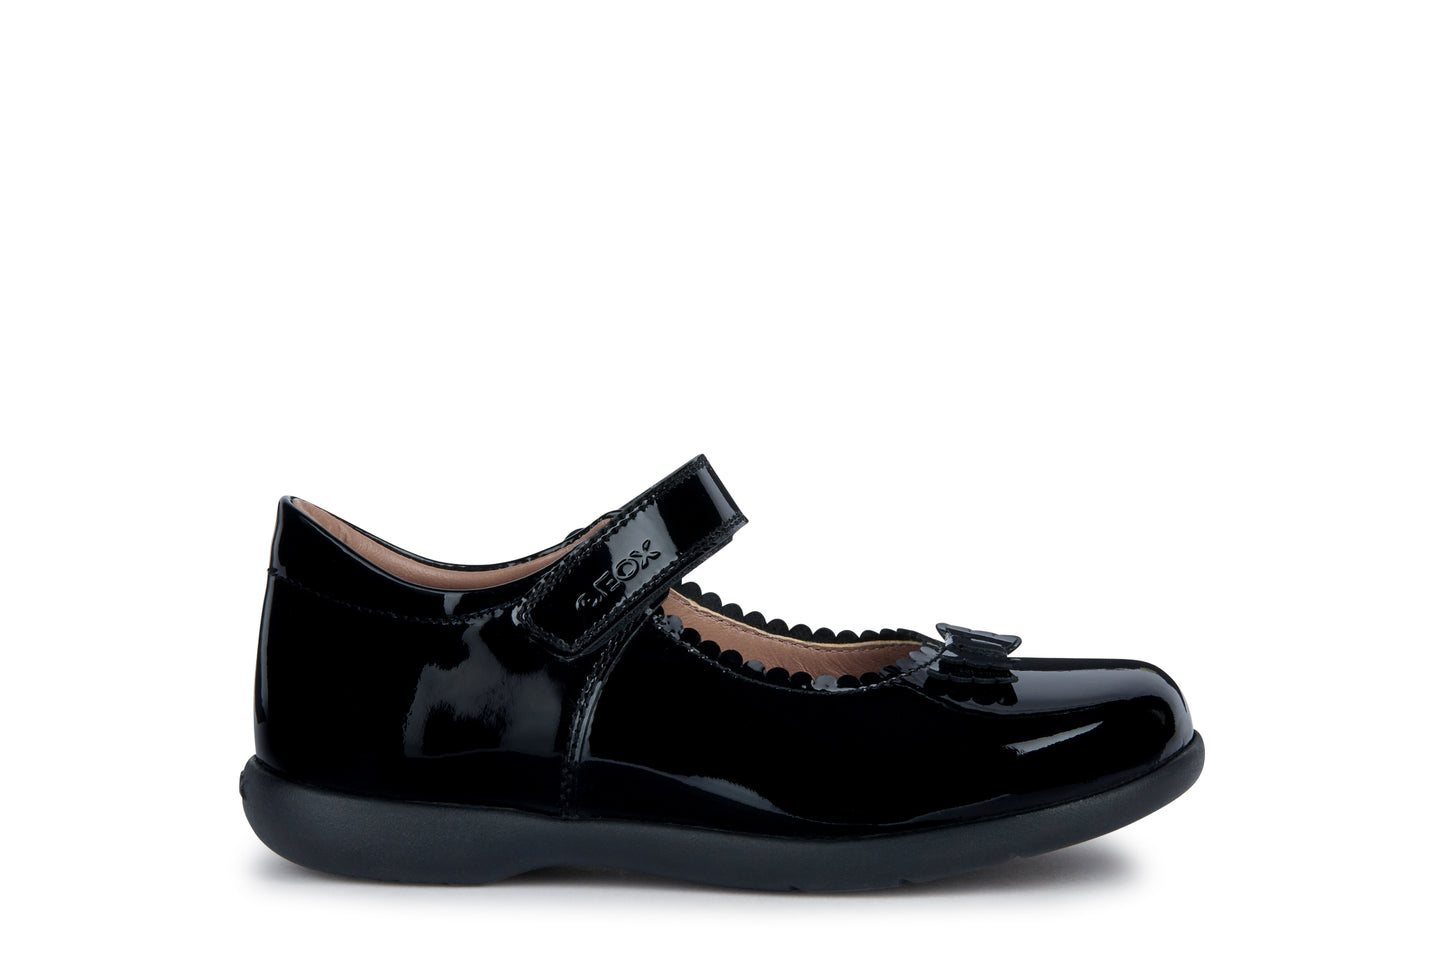 A girls school shoe by Geox, style Naimara in black patent with a velcro strap. Right side view.